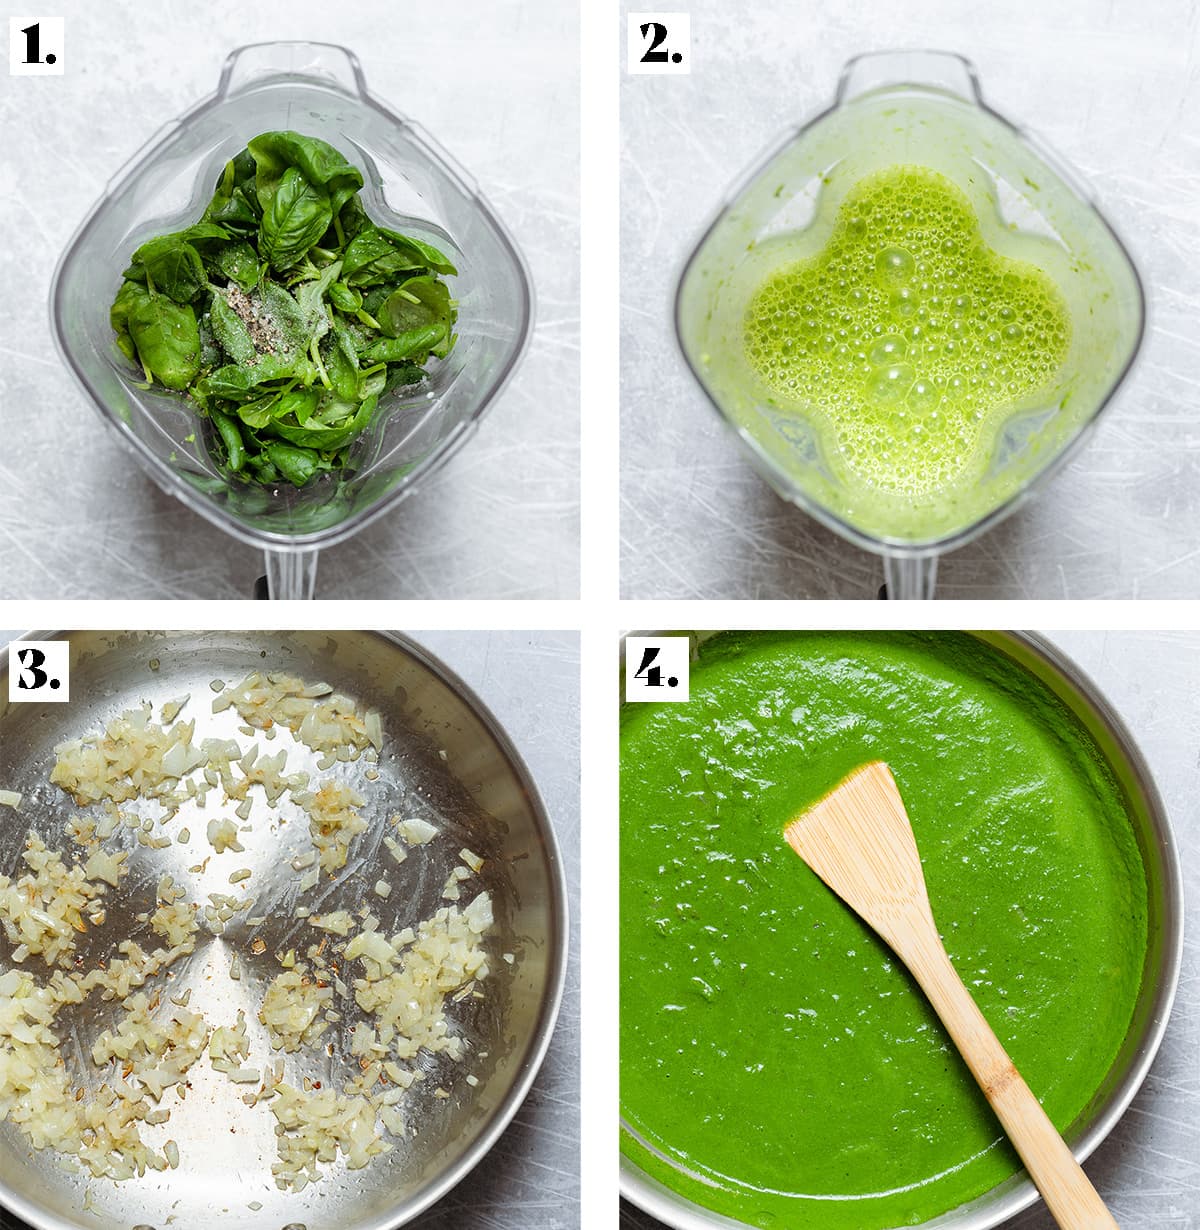 Four process shots showing how to blend spinach into green pasta sauce and cook it.